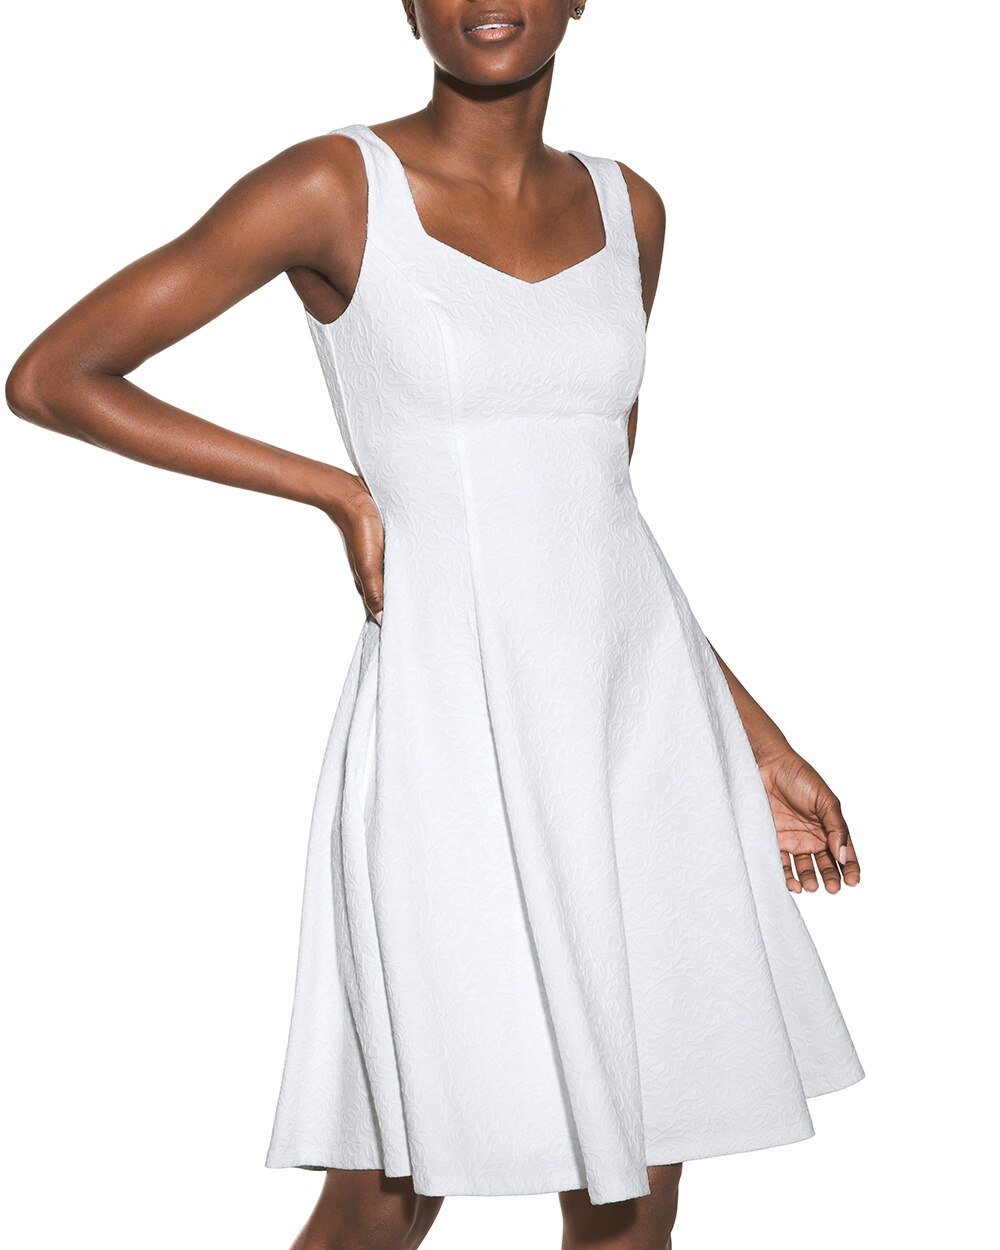 all white fit and flare dress